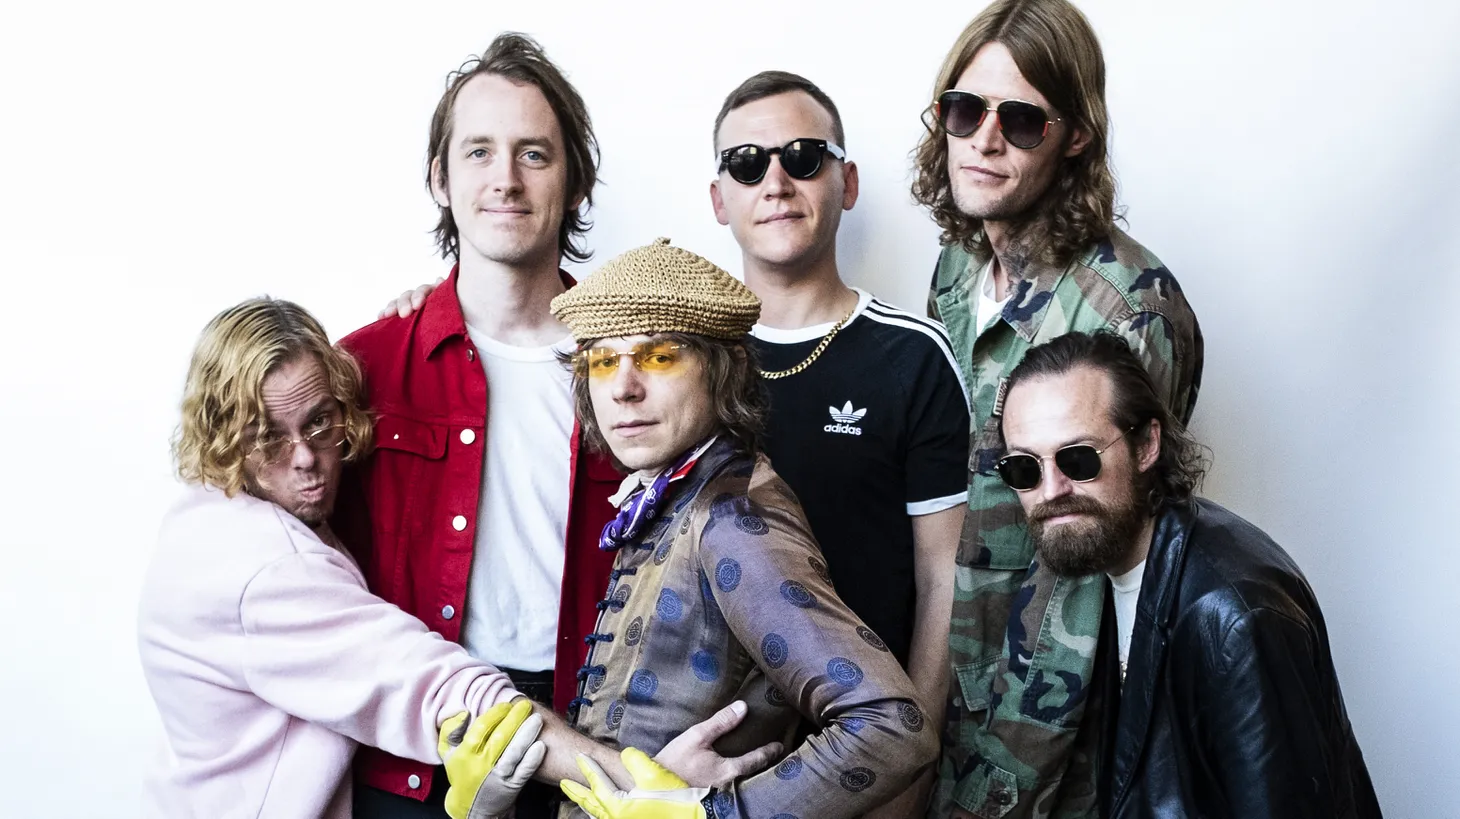 Song Of The Day: Trouble - @Cage The Elephant #cagetheelephant #cageth, Cage The Elephant